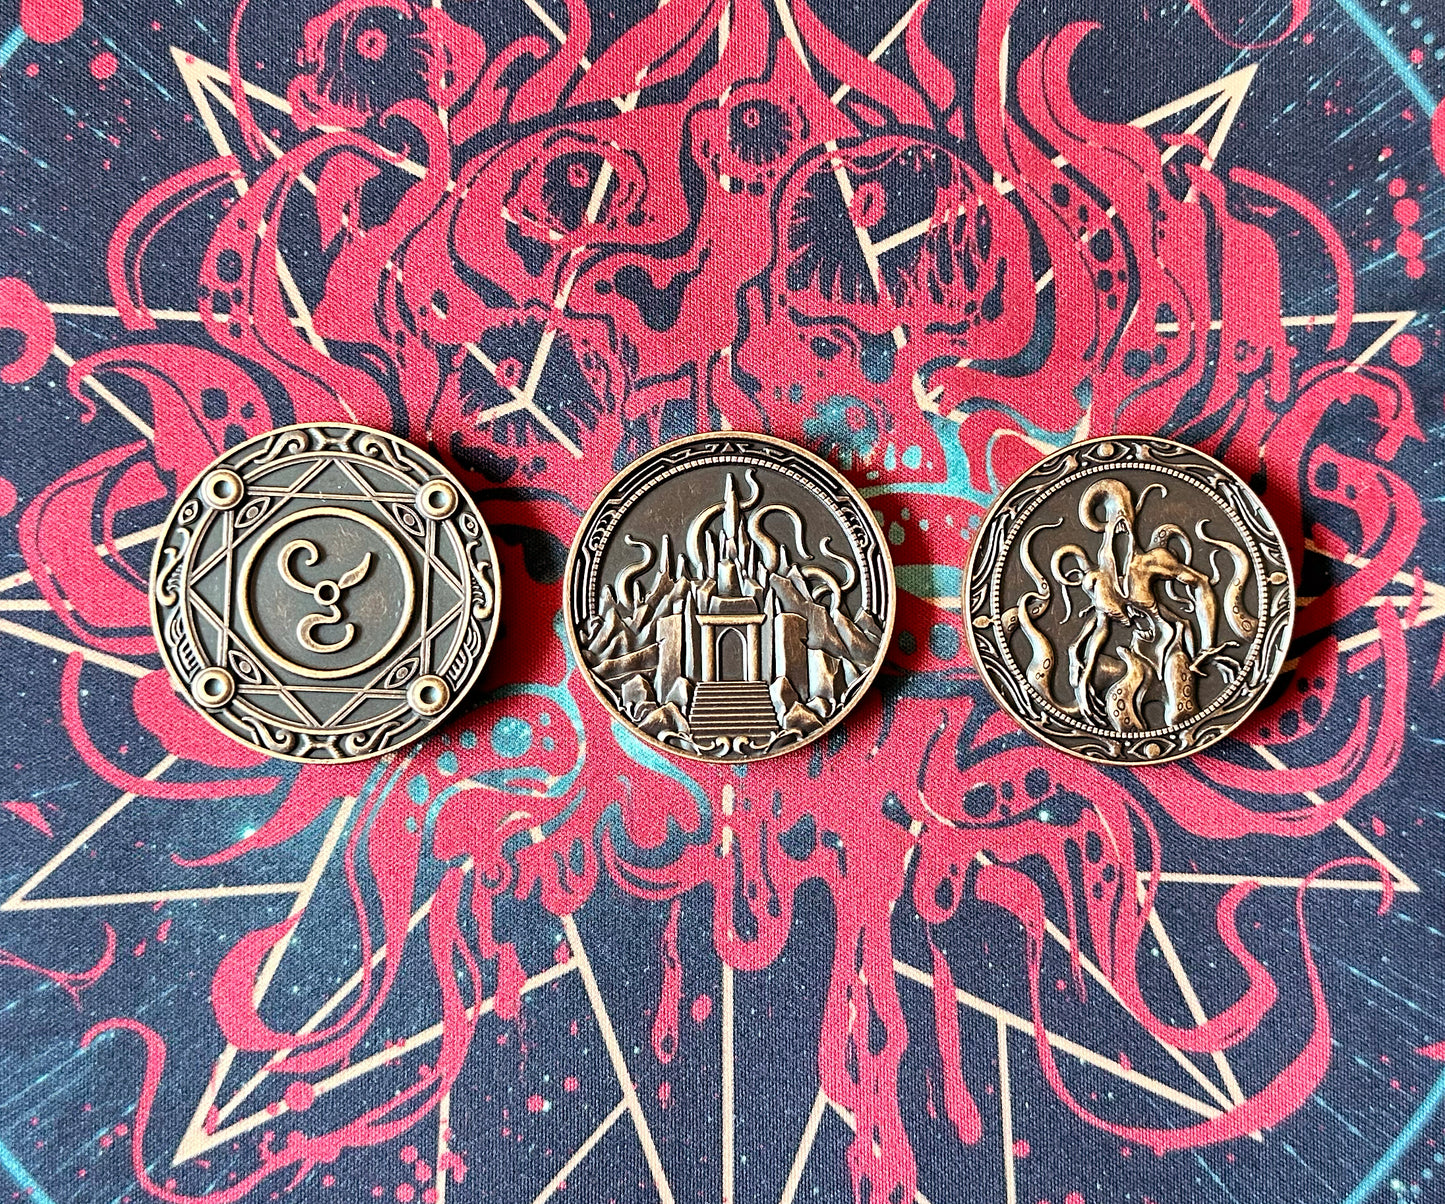 The Hymn to Cthulhu Collectible Metal Coins